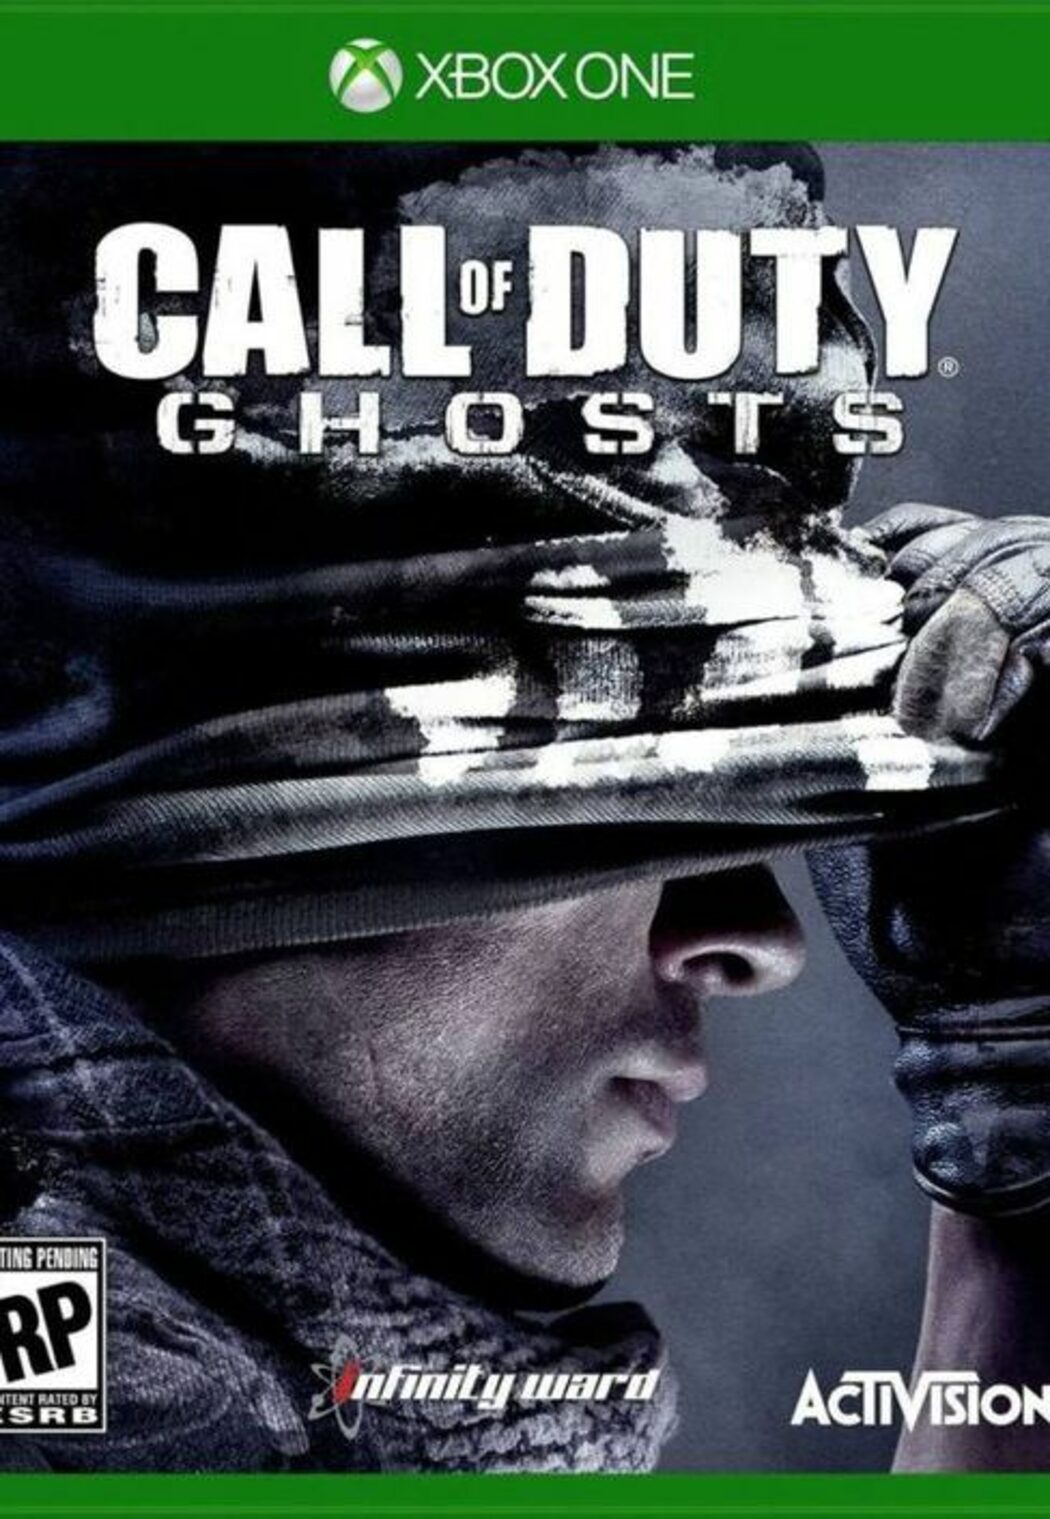 Call of Duty: Ghosts Xbox 360 